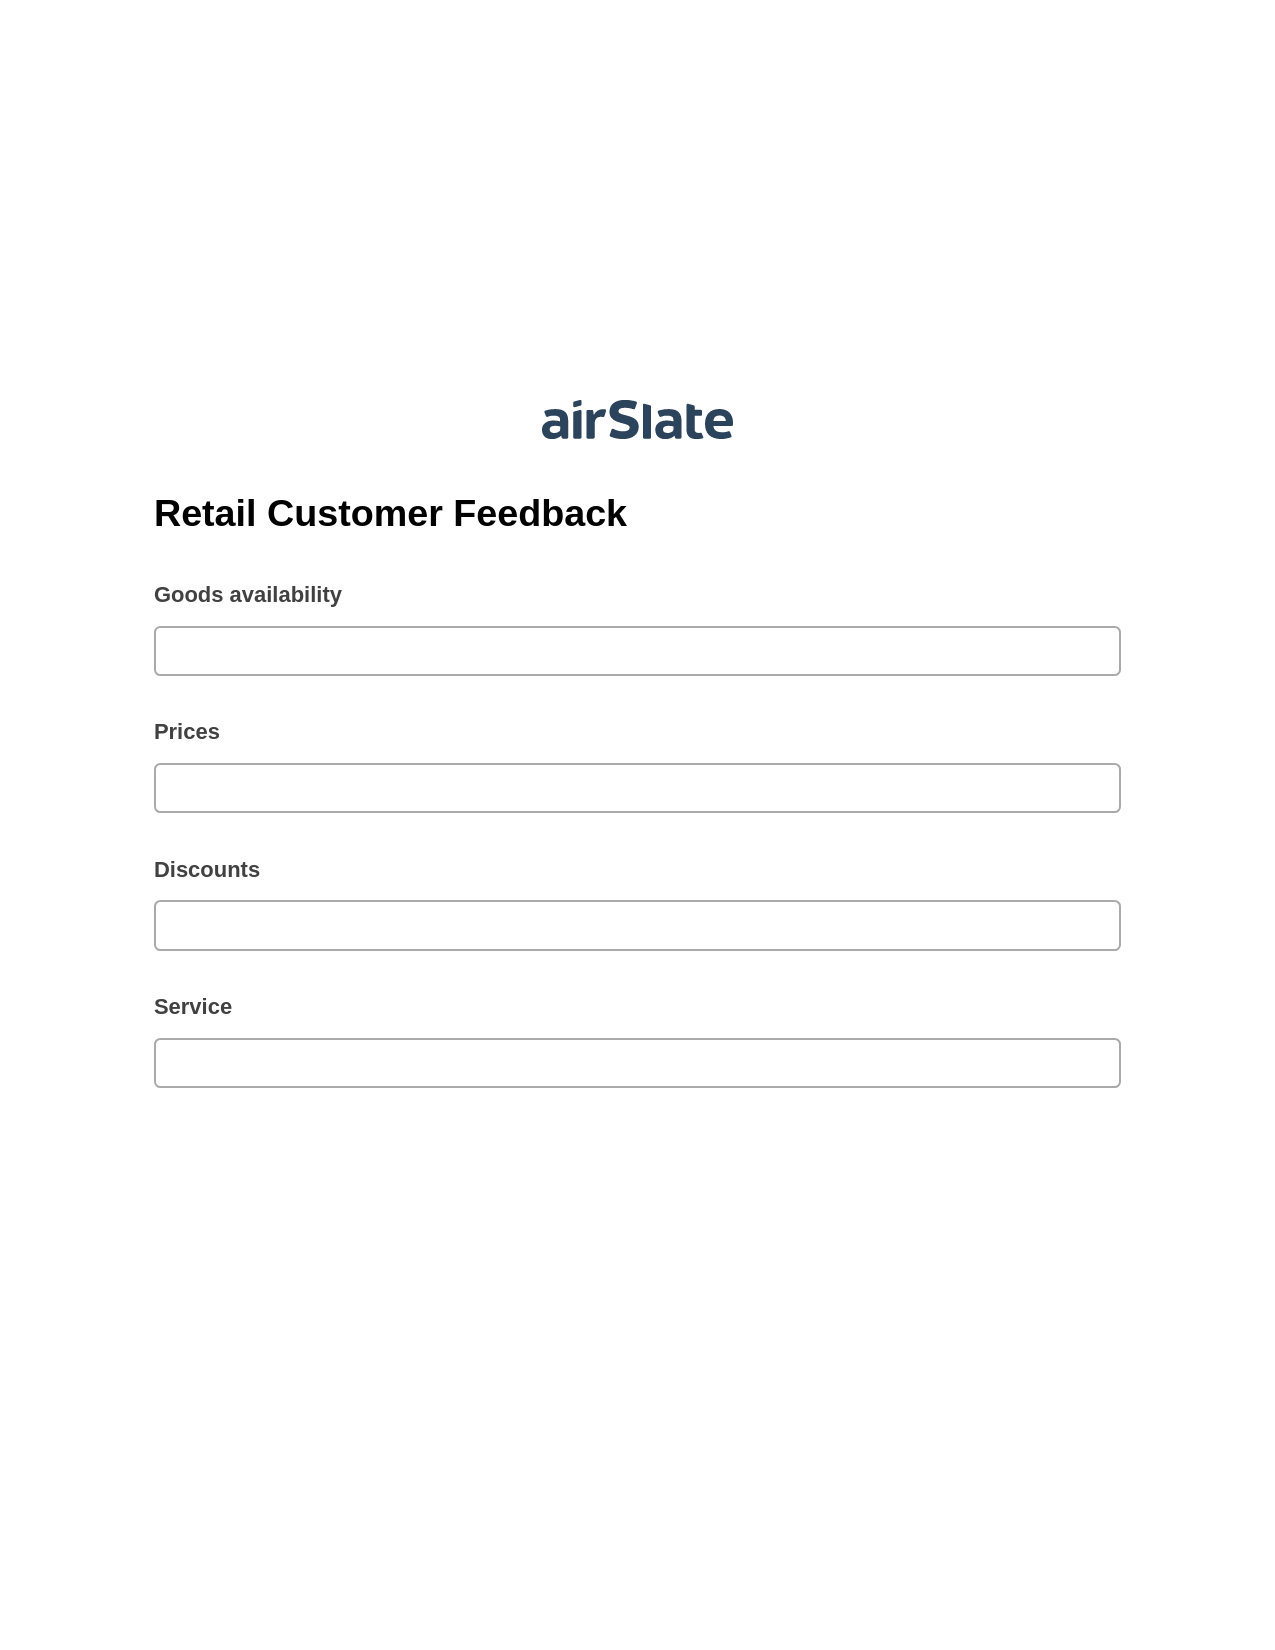 Multirole Retail Customer Feedback Pre-fill from CSV File Bot, Send Mailchimp Campaign Bot, Post-finish Document Bot